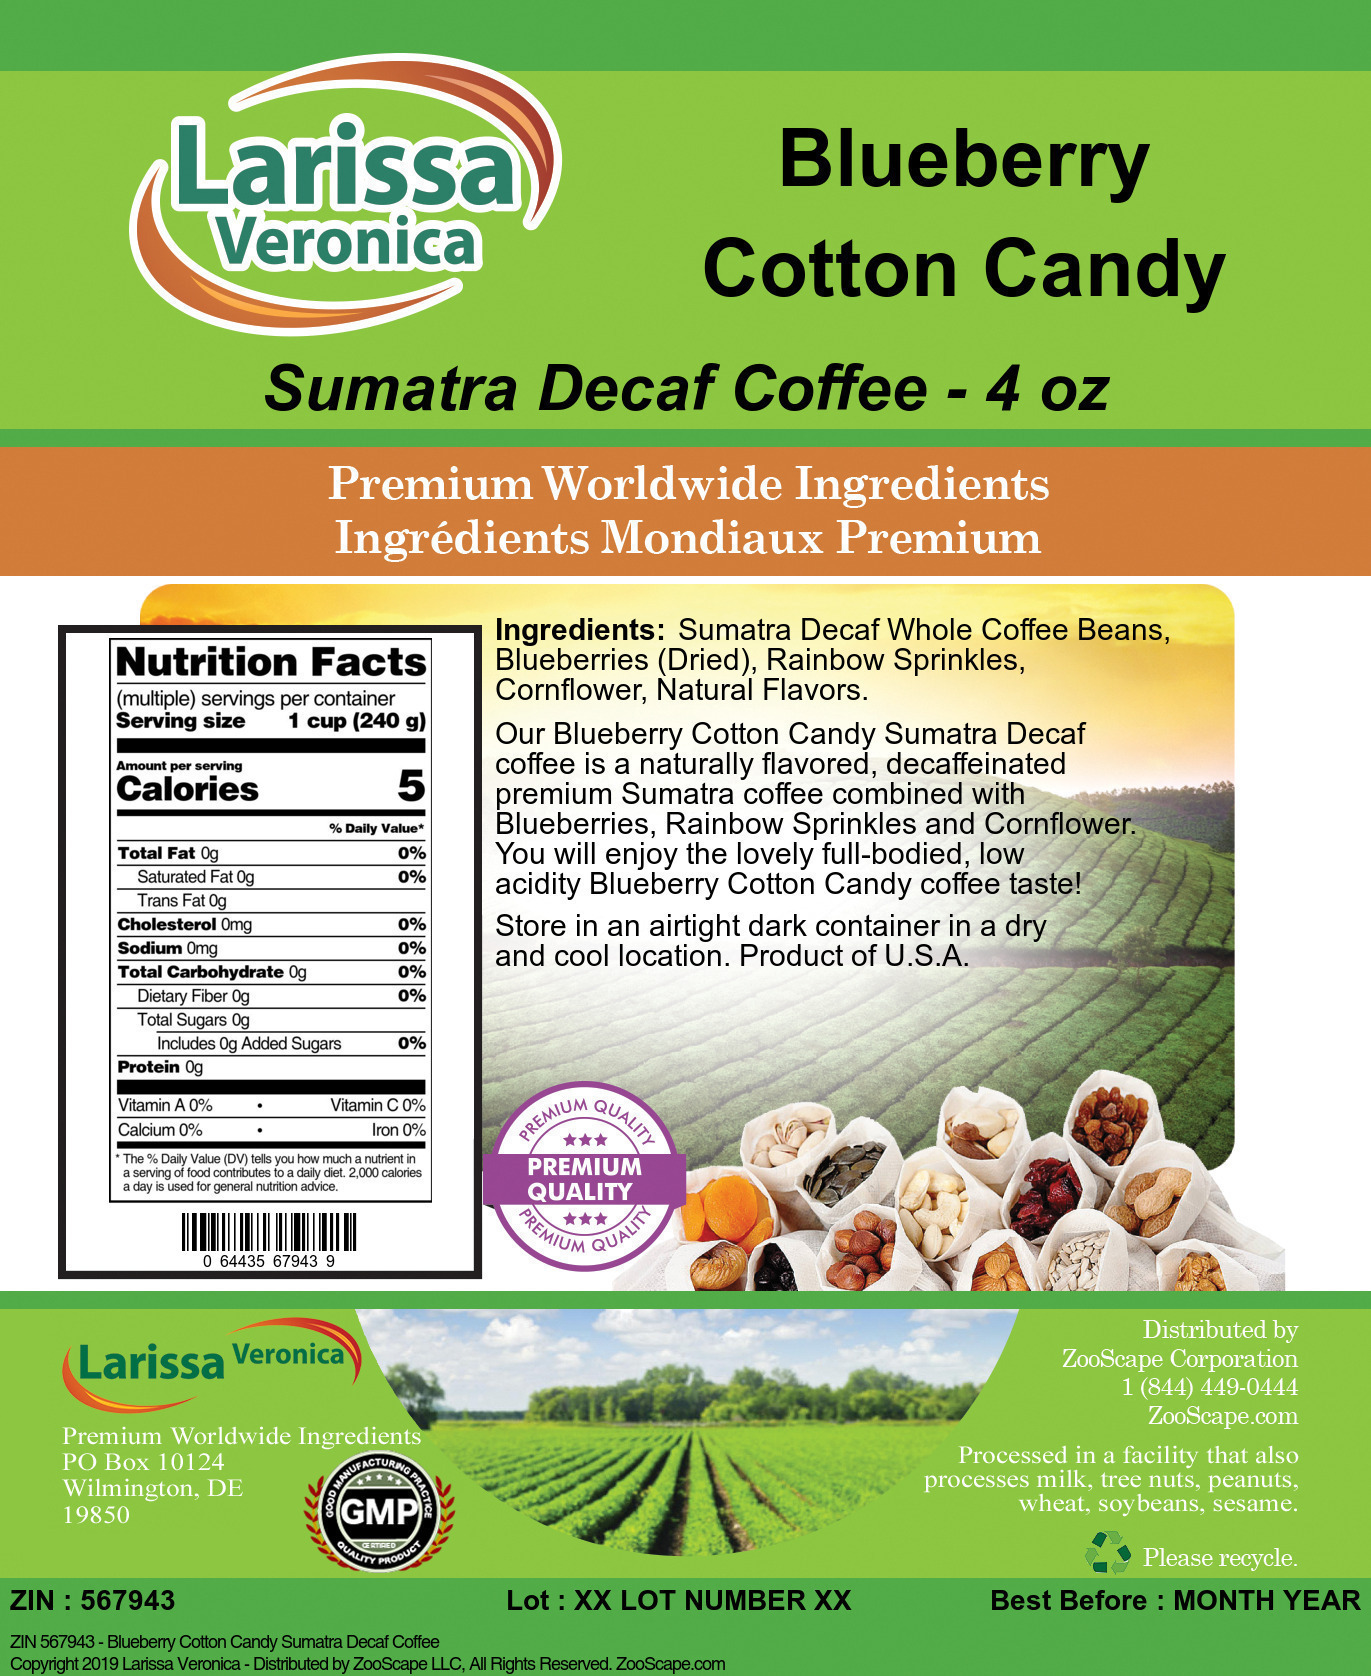 Blueberry Cotton Candy Sumatra Decaf Coffee - Label